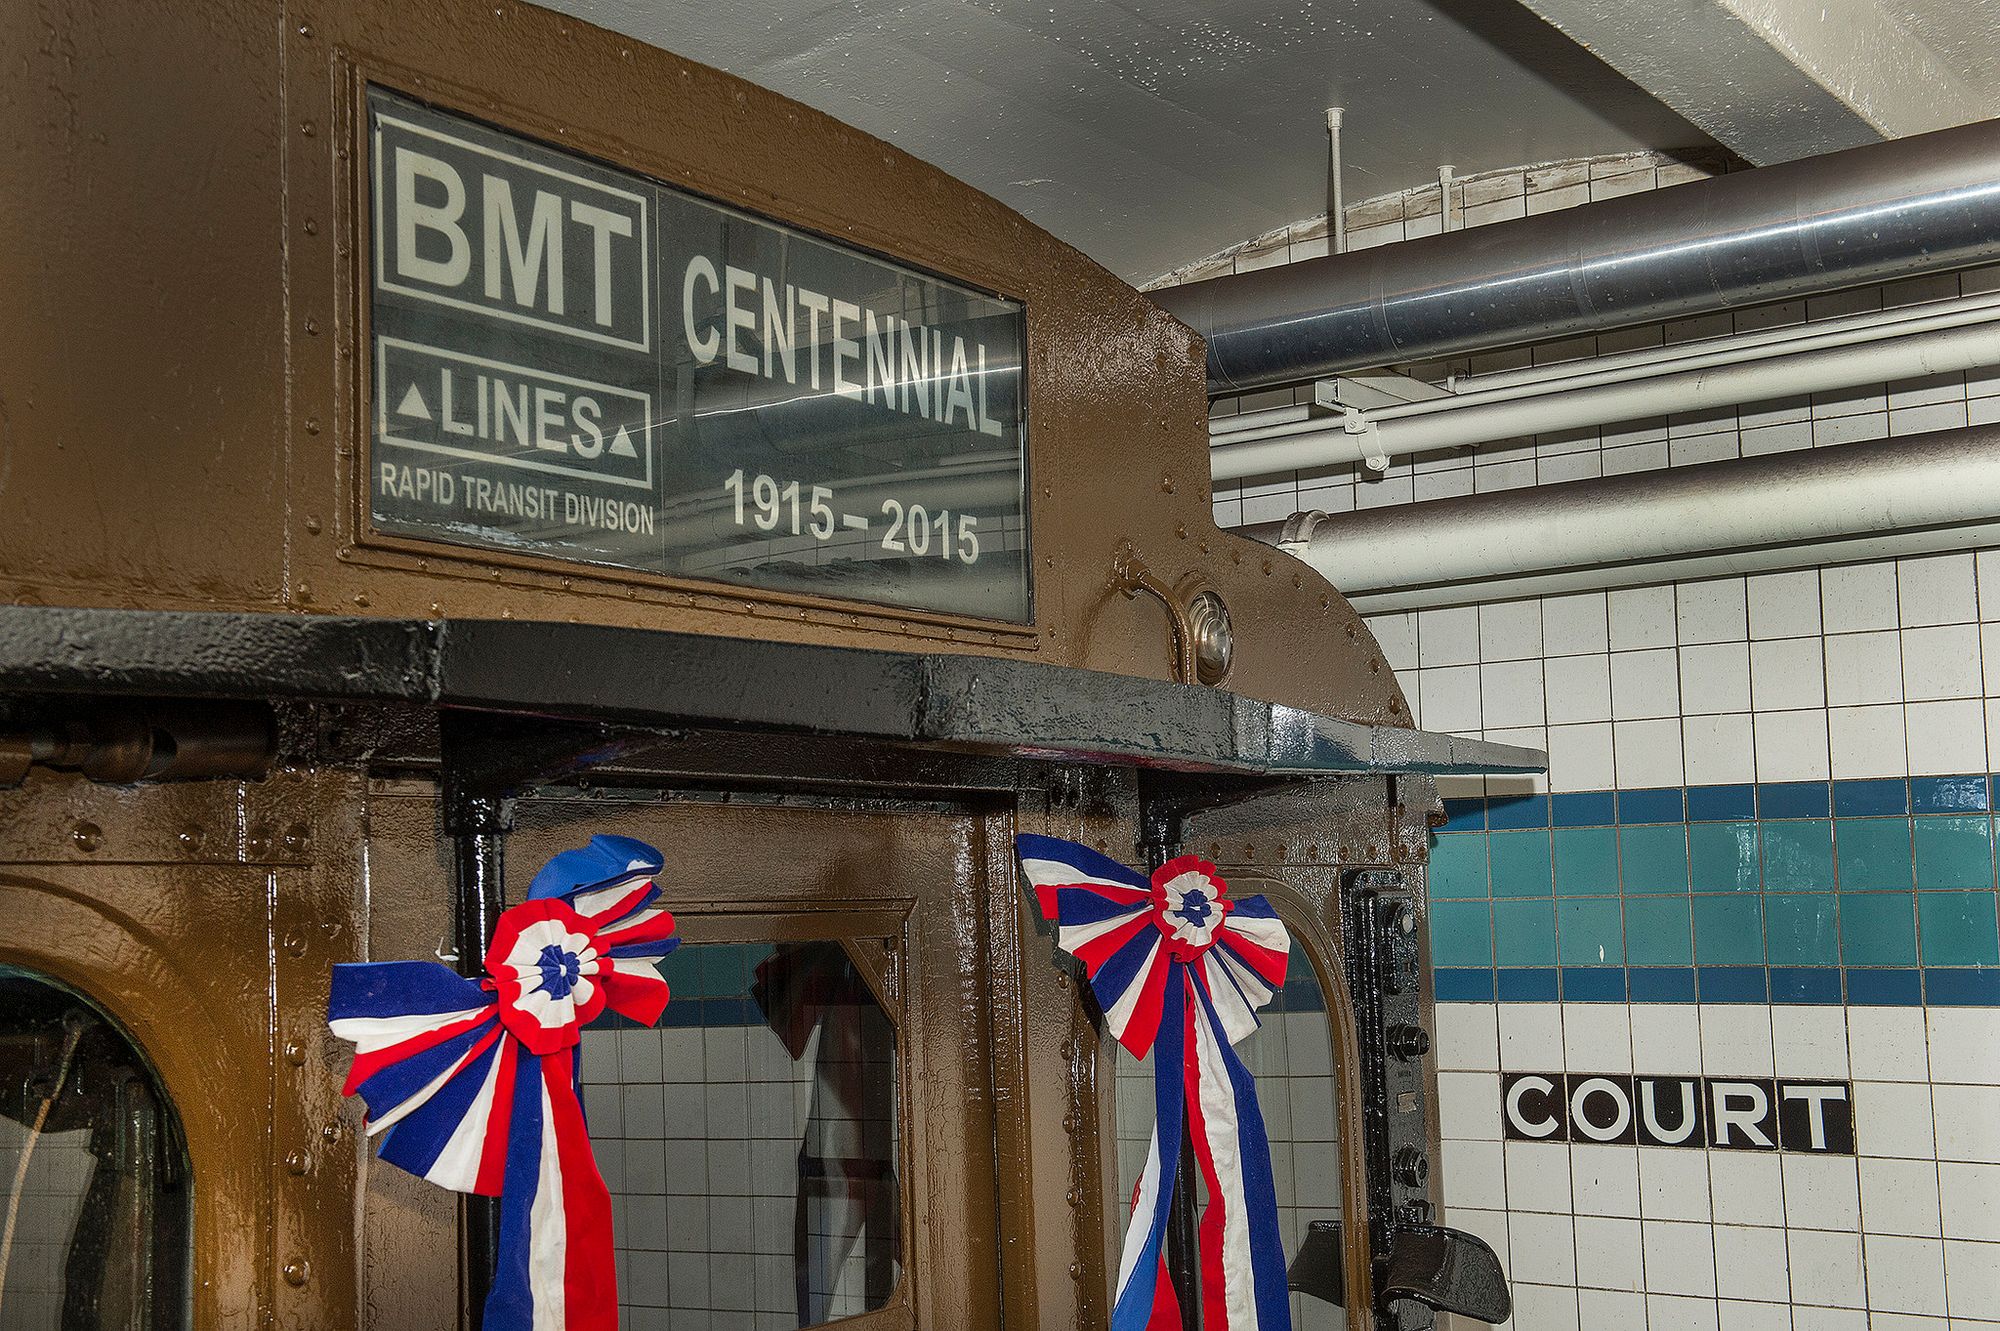 Nostalgia Trains And More At Brighton Beach Station This Weekend To Celebrate Centennial Of BMT